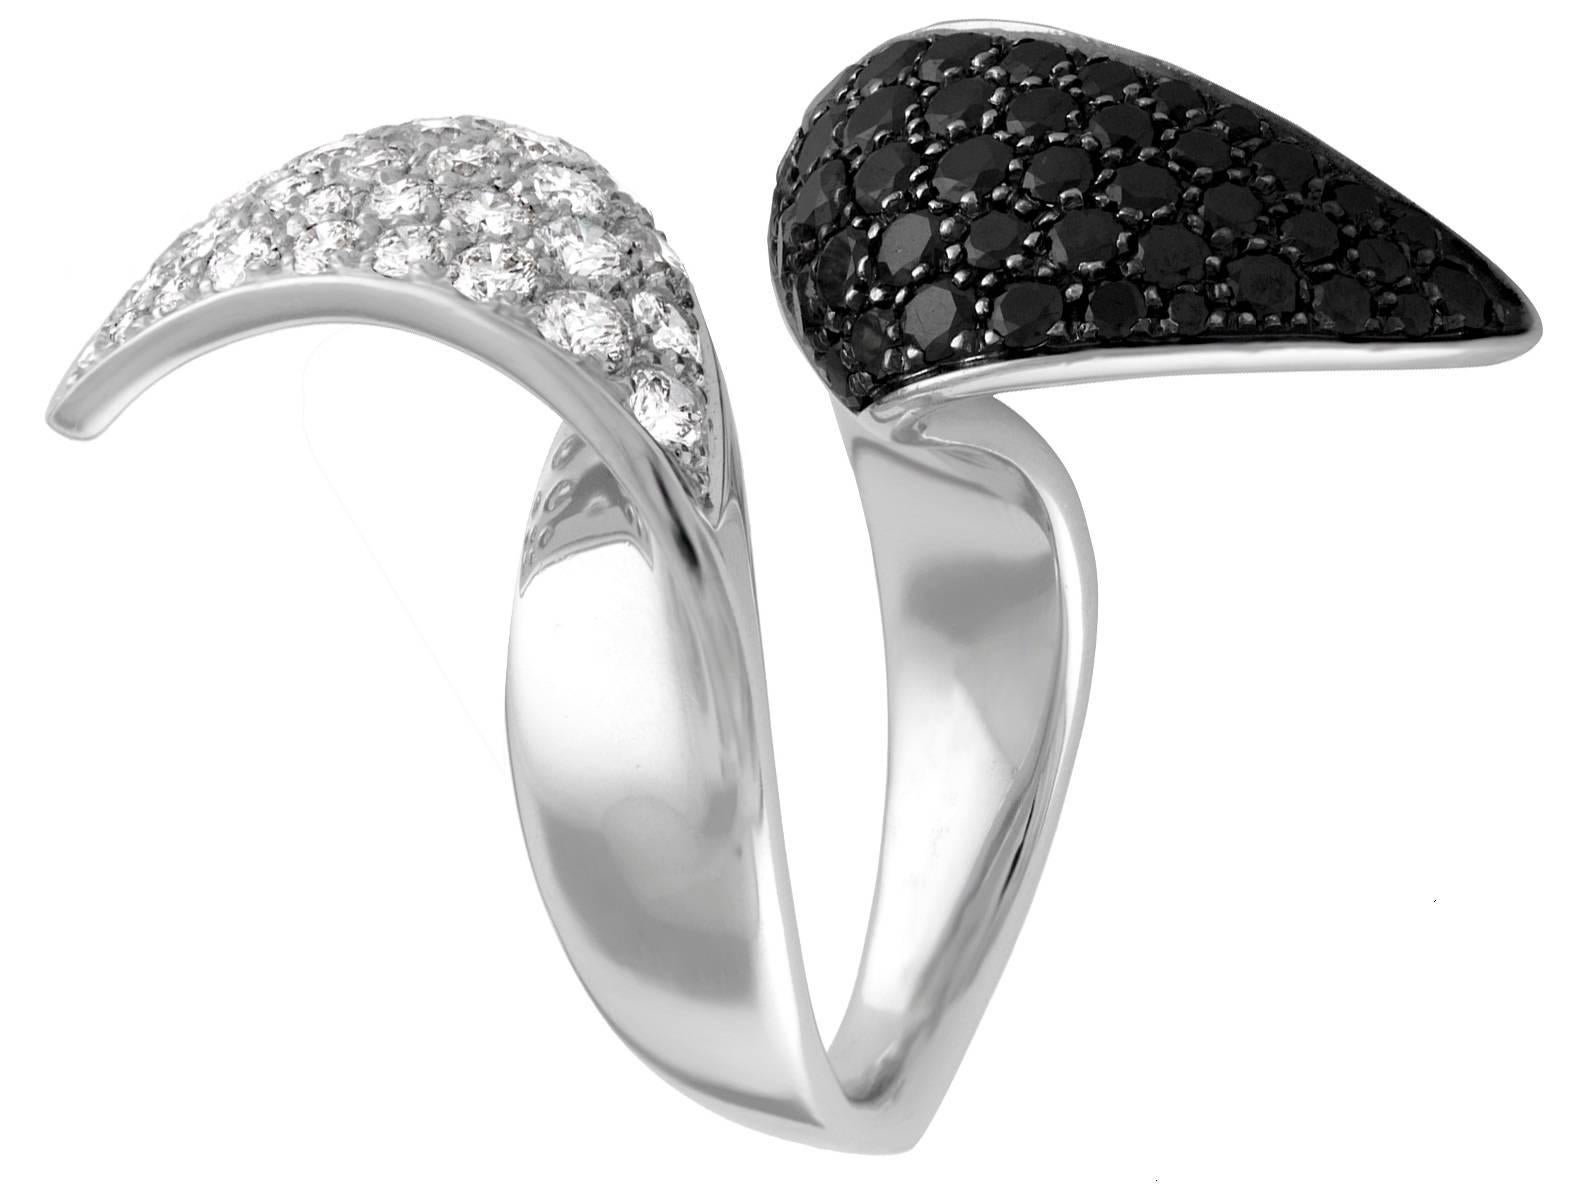 Very Unusual Bypass Ring
The ring is 18K White Gold
There is 2.50 Carats in Black Diamonds
There is 2.25 Carats in White Diamonds F VS
The ring is by an Italian Designer IO SI Scavia.
The ring is made in Italy.
The ring measures 1.5